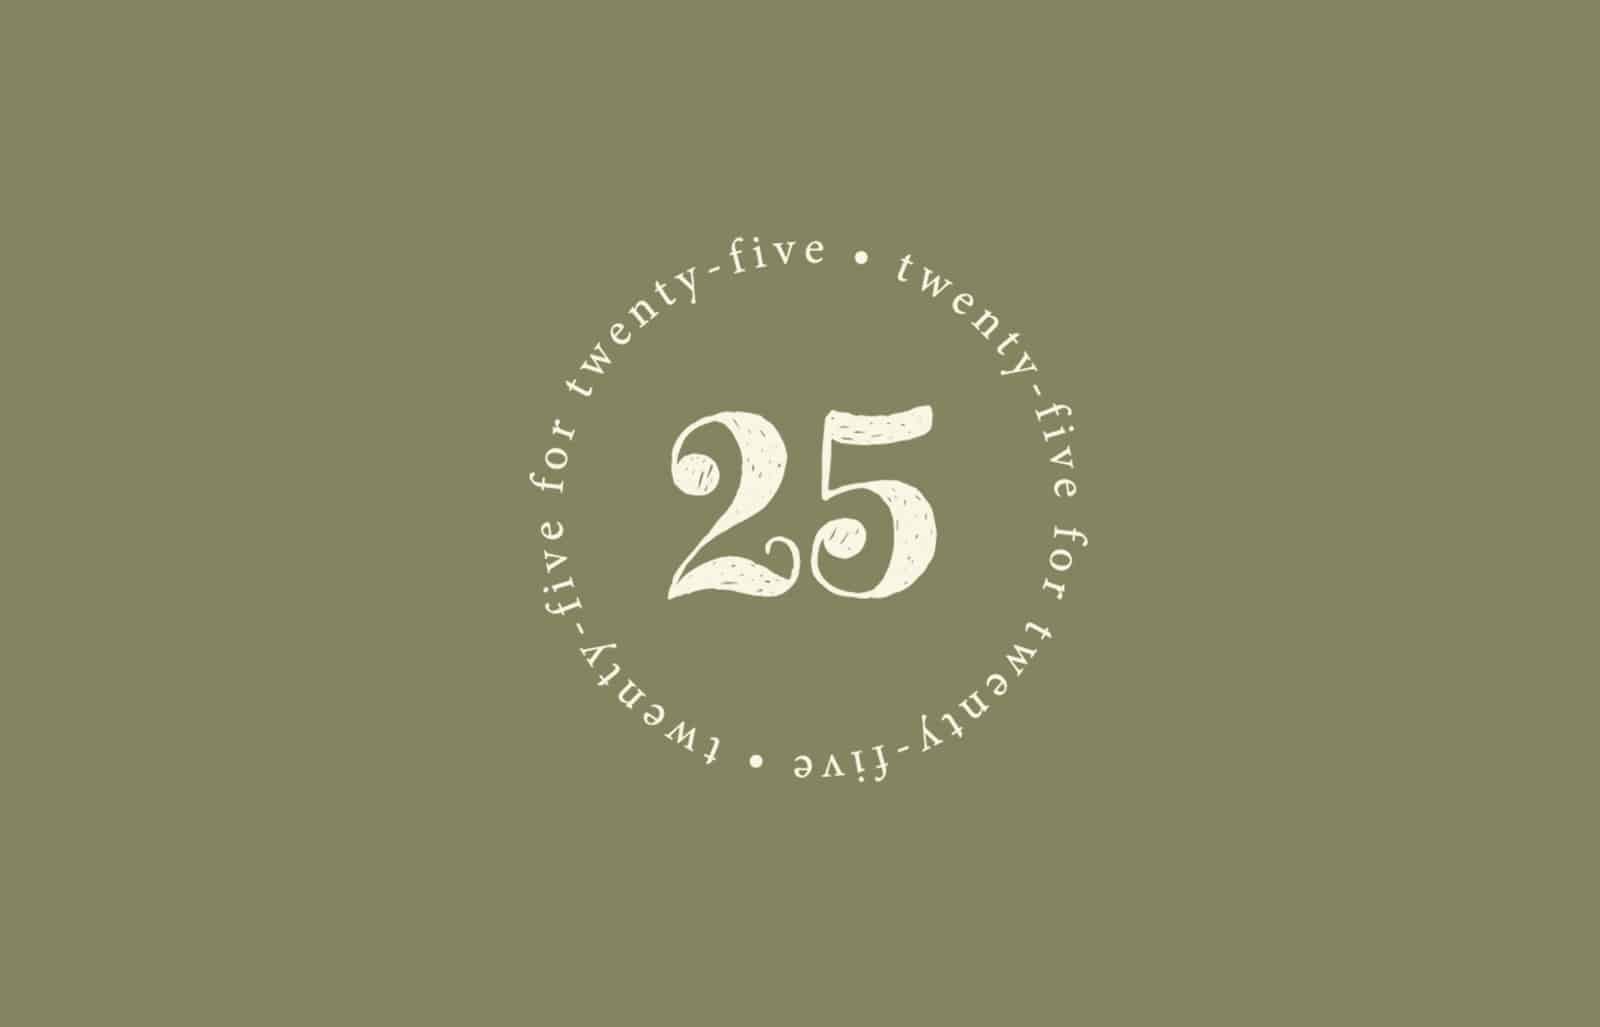 25 for 25 nonprofit fundraising campaign logo